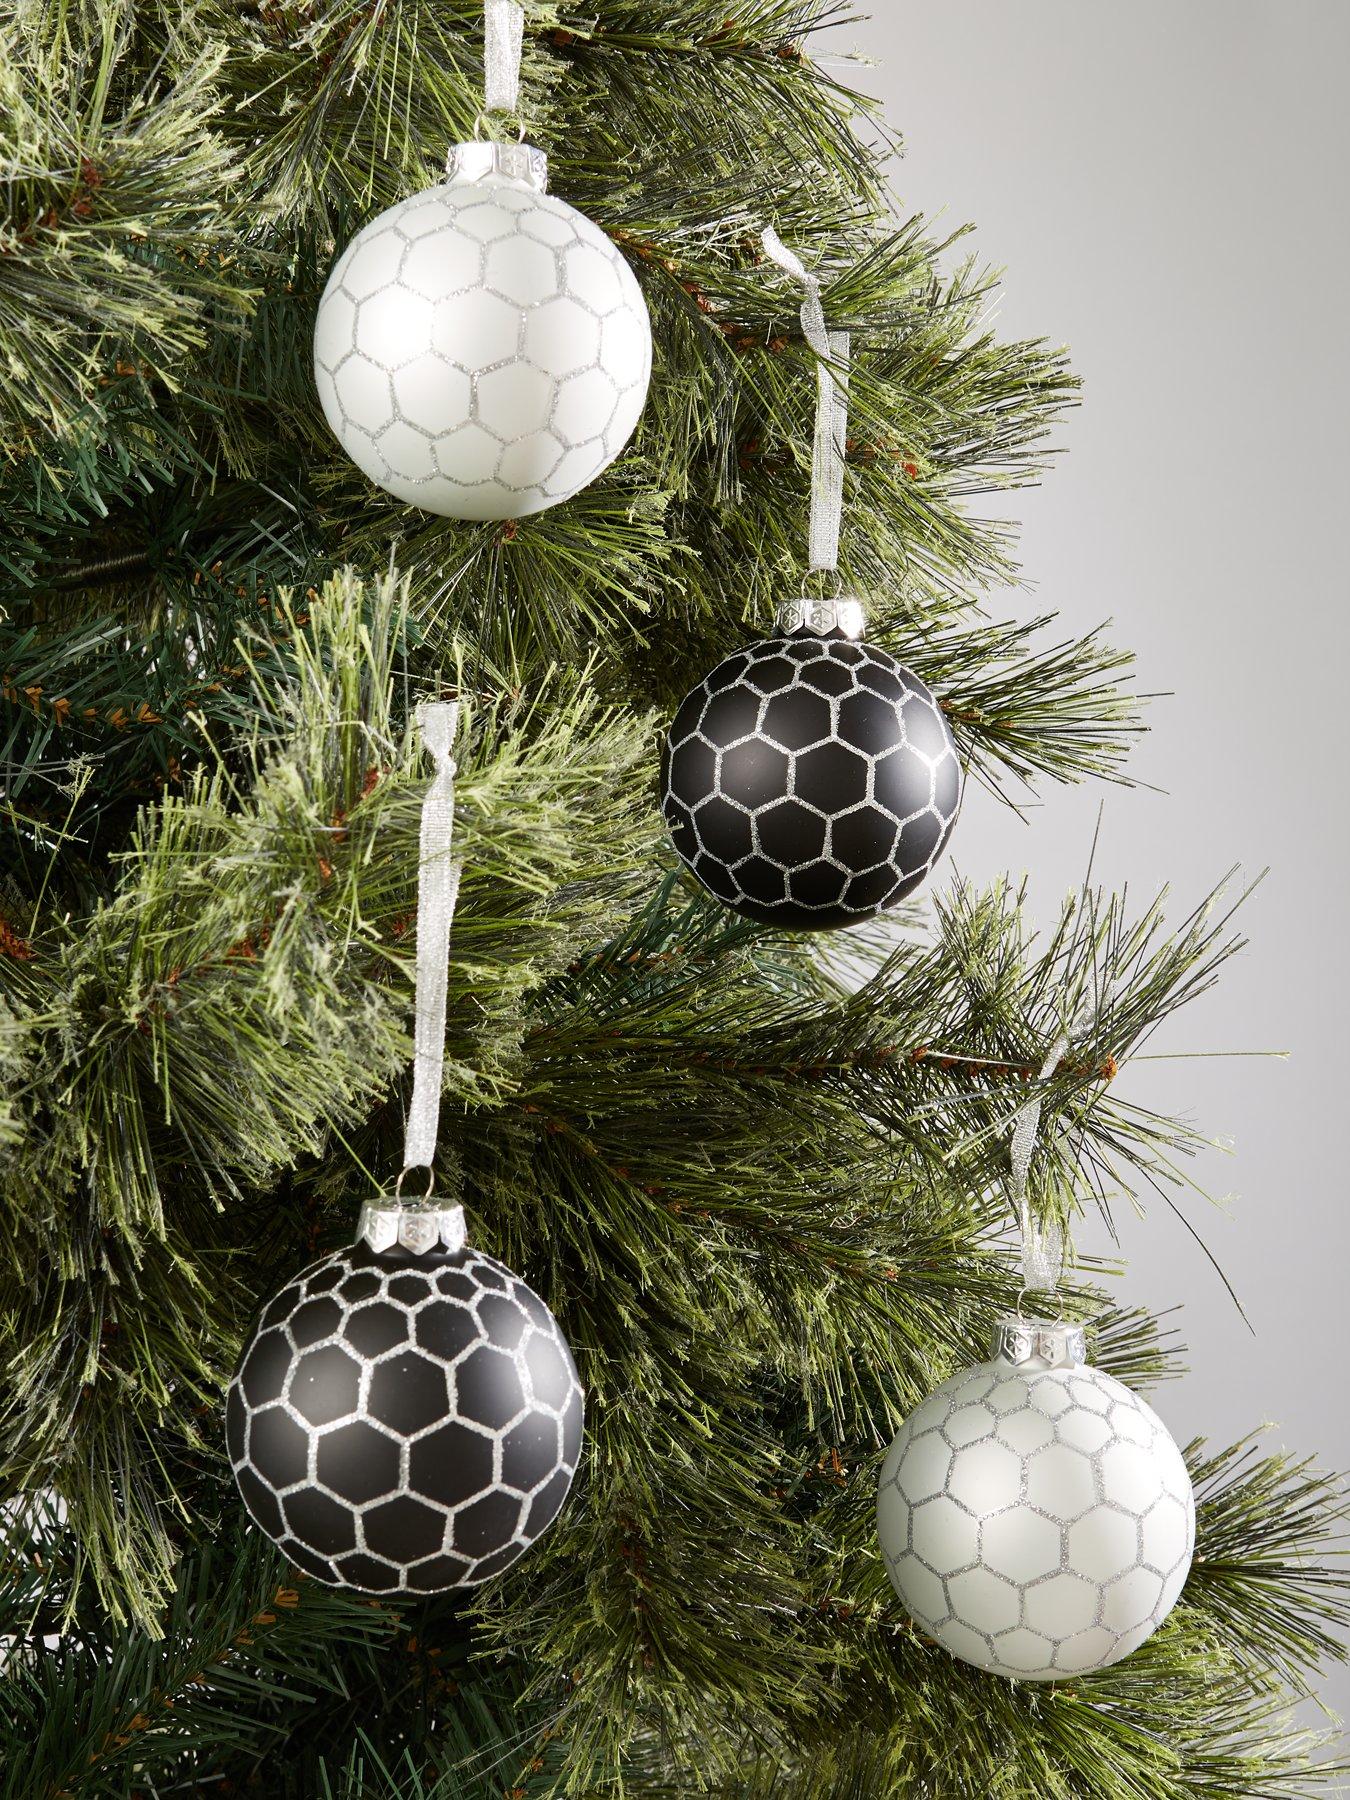 Details about   Set Of 4 Plastic DIY Textured Christmas Ornaments For Crafting 3.5” Diameter 